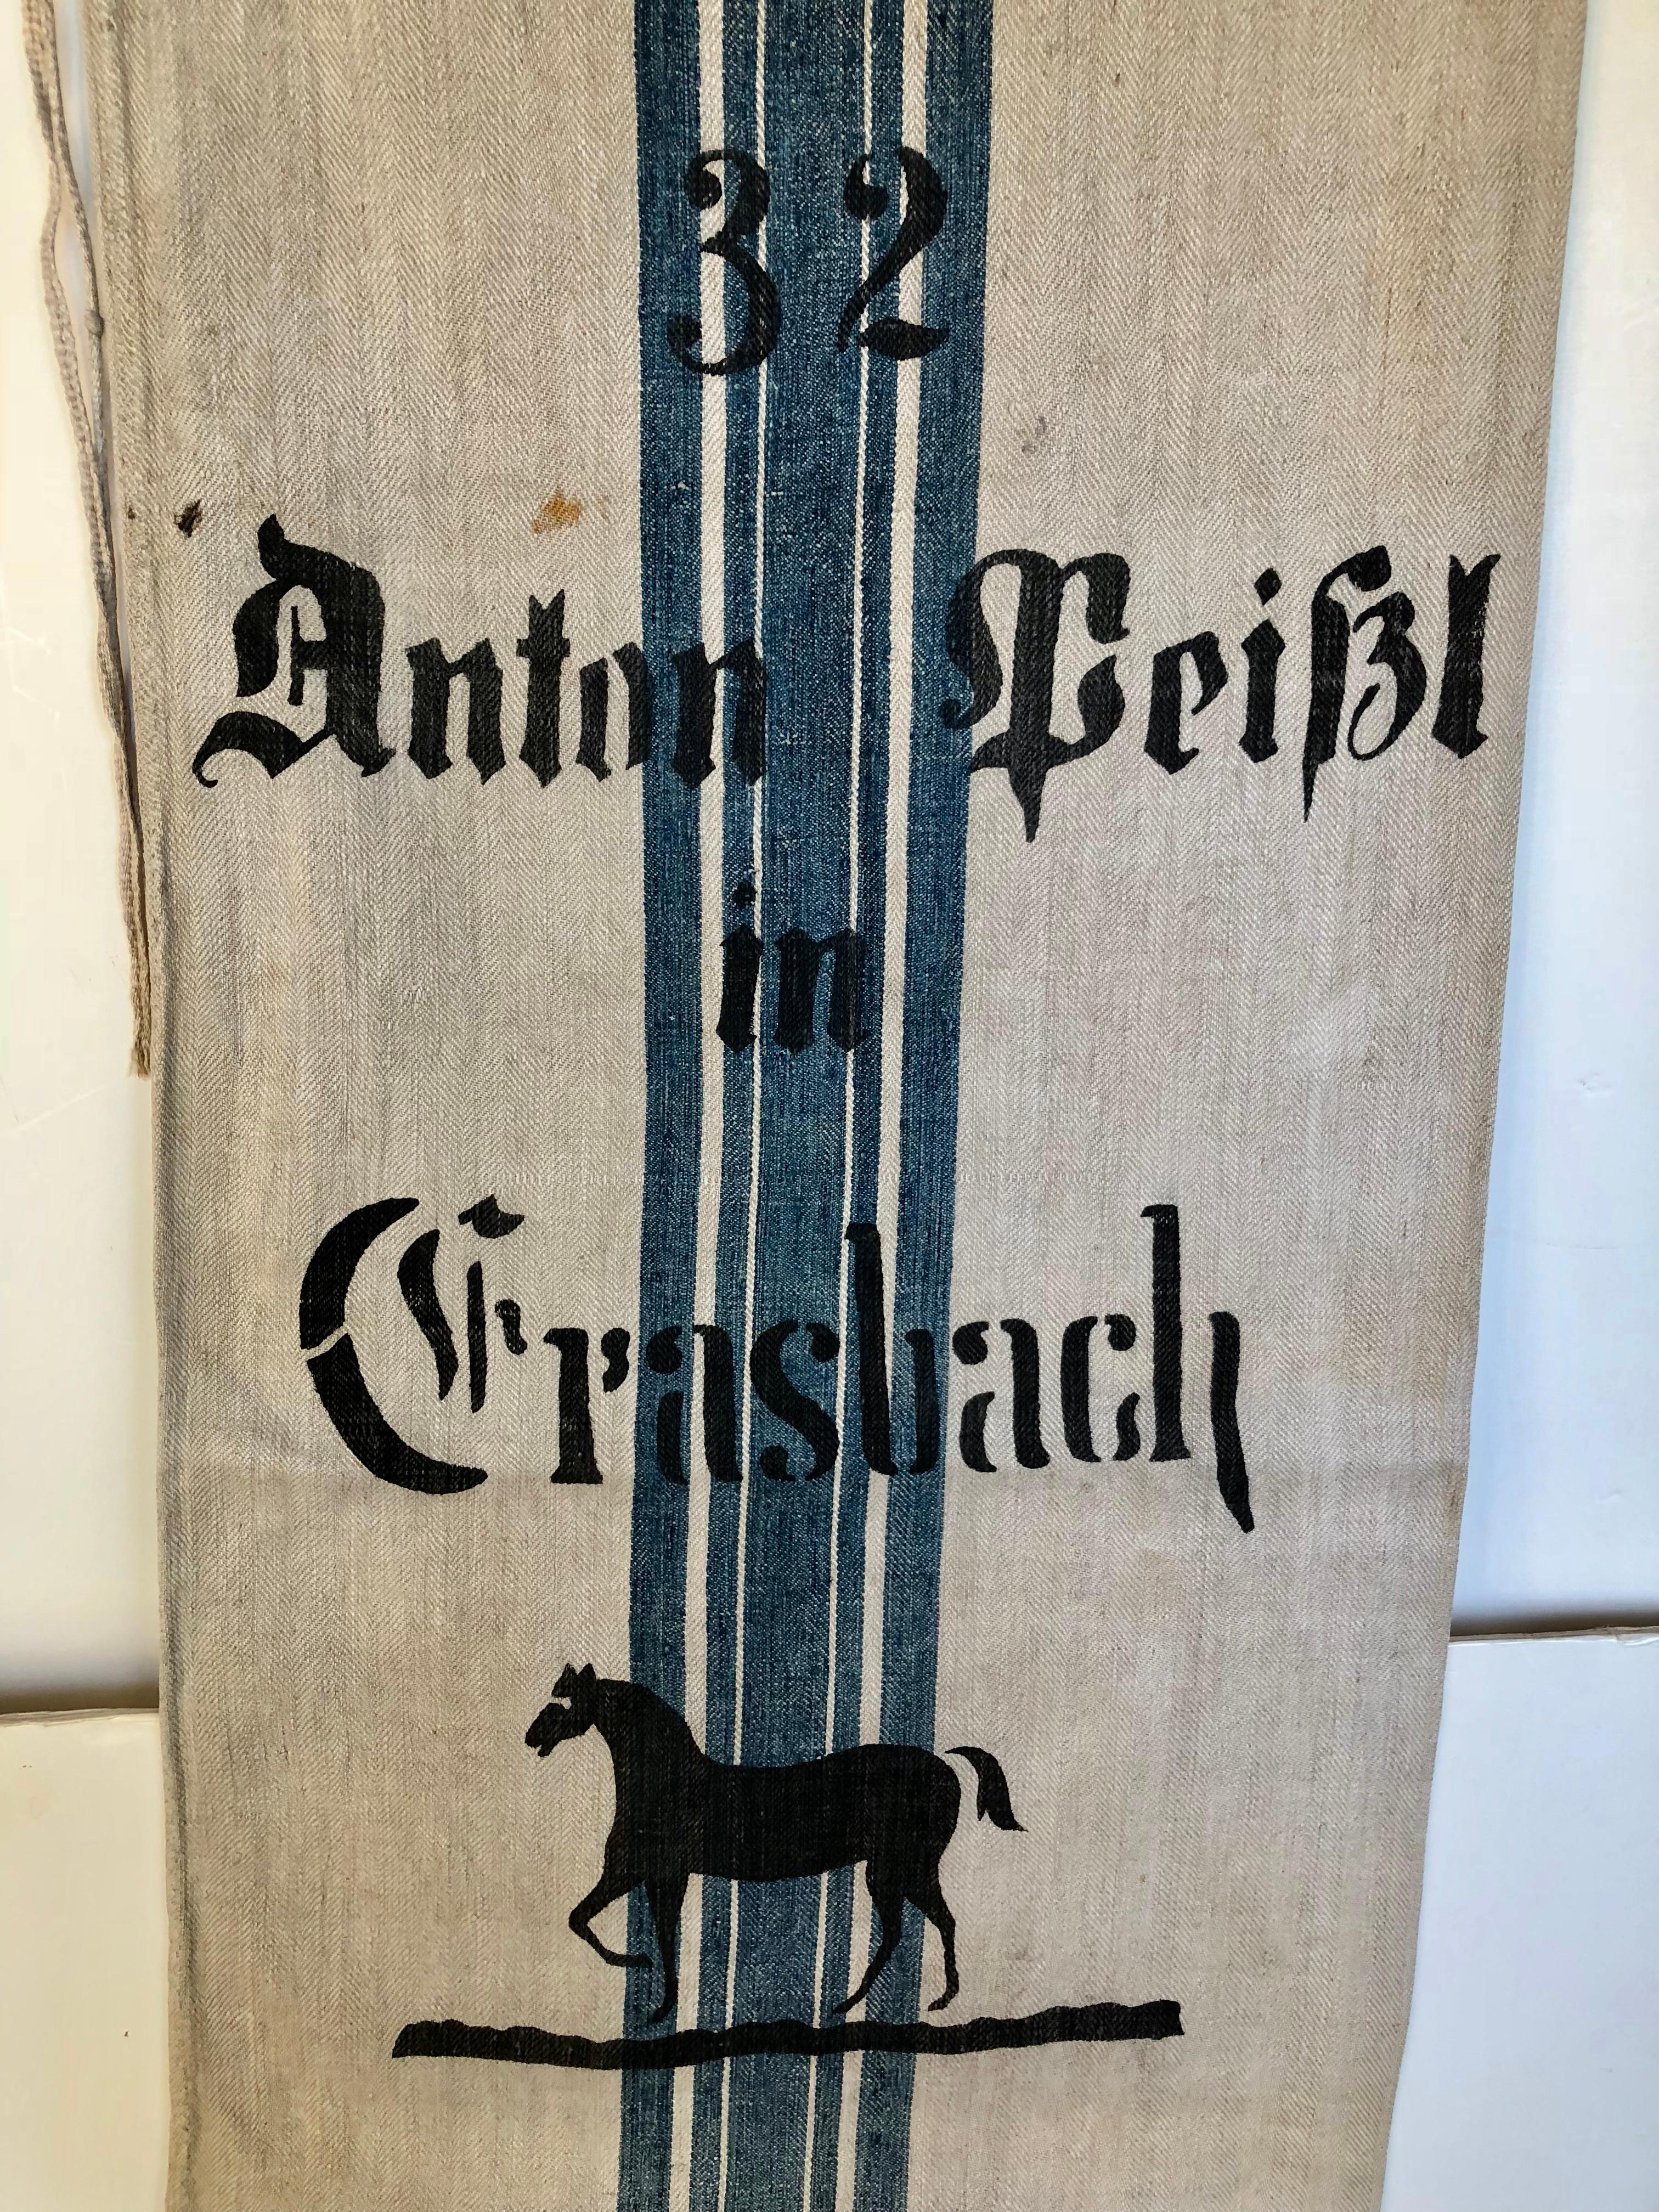 Early German handwoven grain sack with original graphics and calligraphy. It was made from linen and hemp by the farmer's wife and used to store grains in the barn. The farmer's name, town and inventory # were starting, ped with black tar. It was